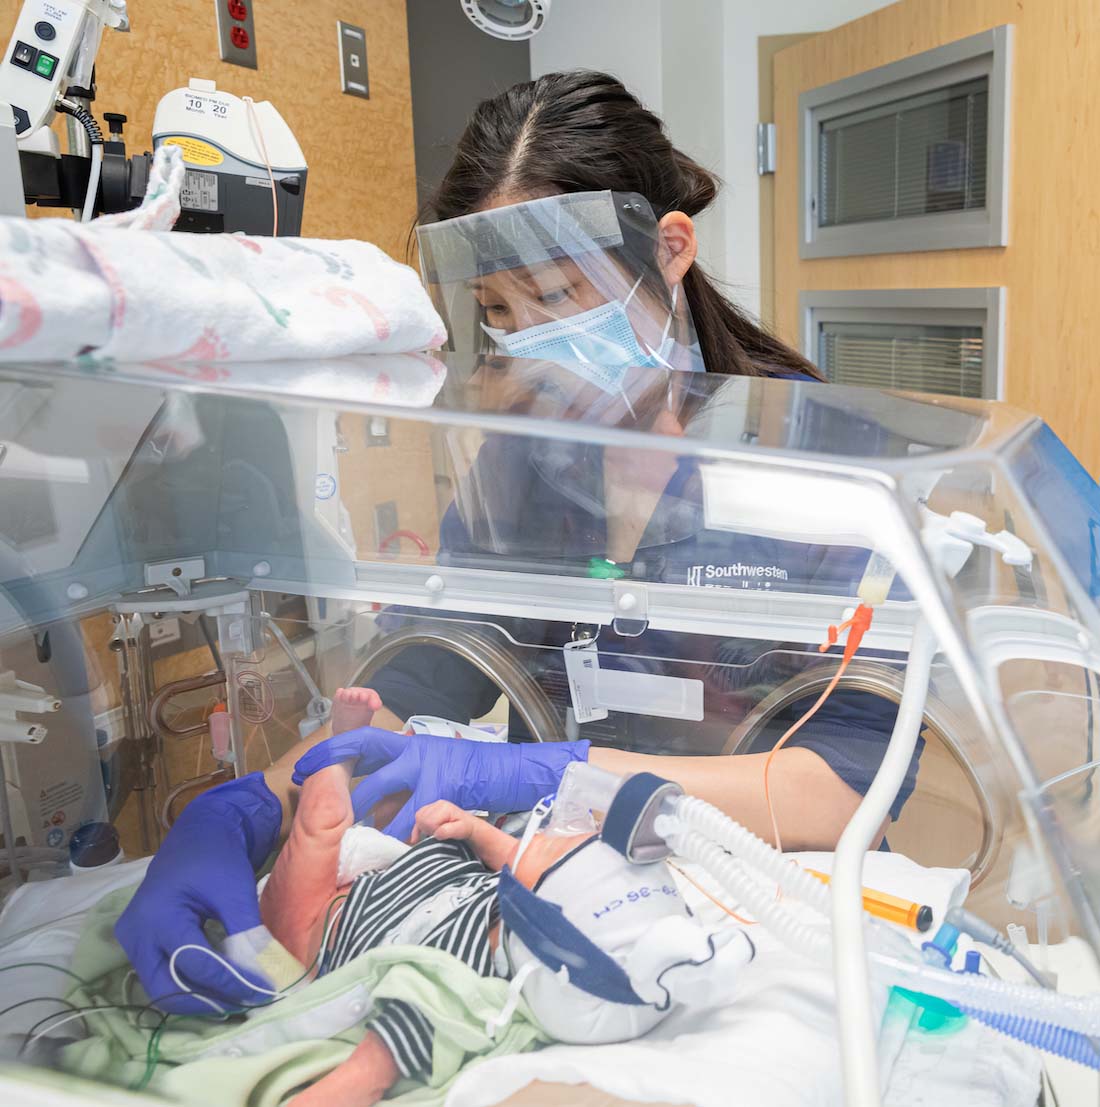 Infants are increasingly being admitted to the neonatal intensive care unit, or NICU, from the delivery room on CPAP. New findings show optimizing CPAP and surfactant improves outcomes.